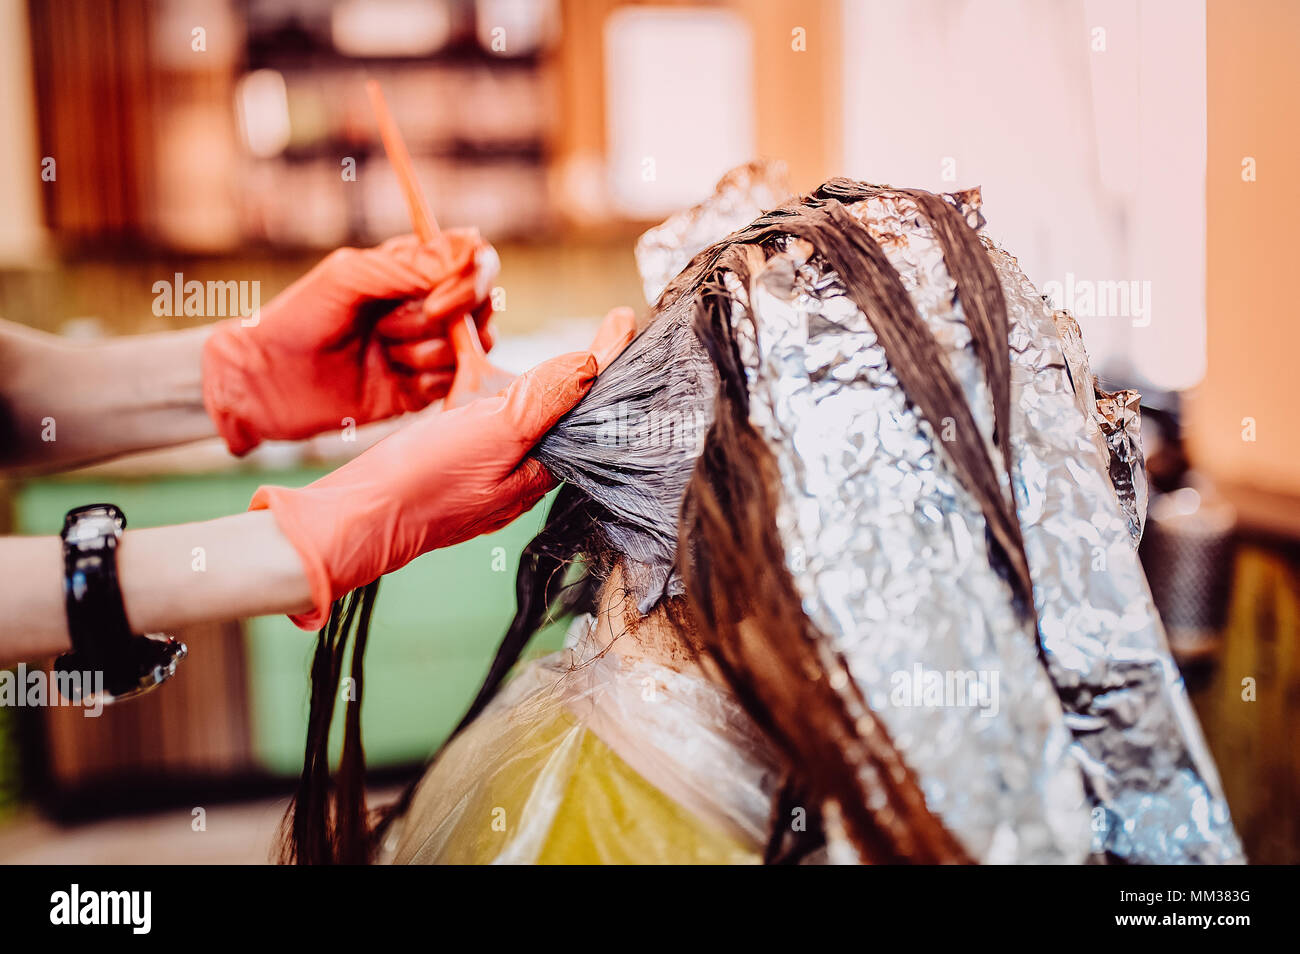 Woman in gloves is dying hair. hair dyeing. Toned image. Hair in foil Stock Photo